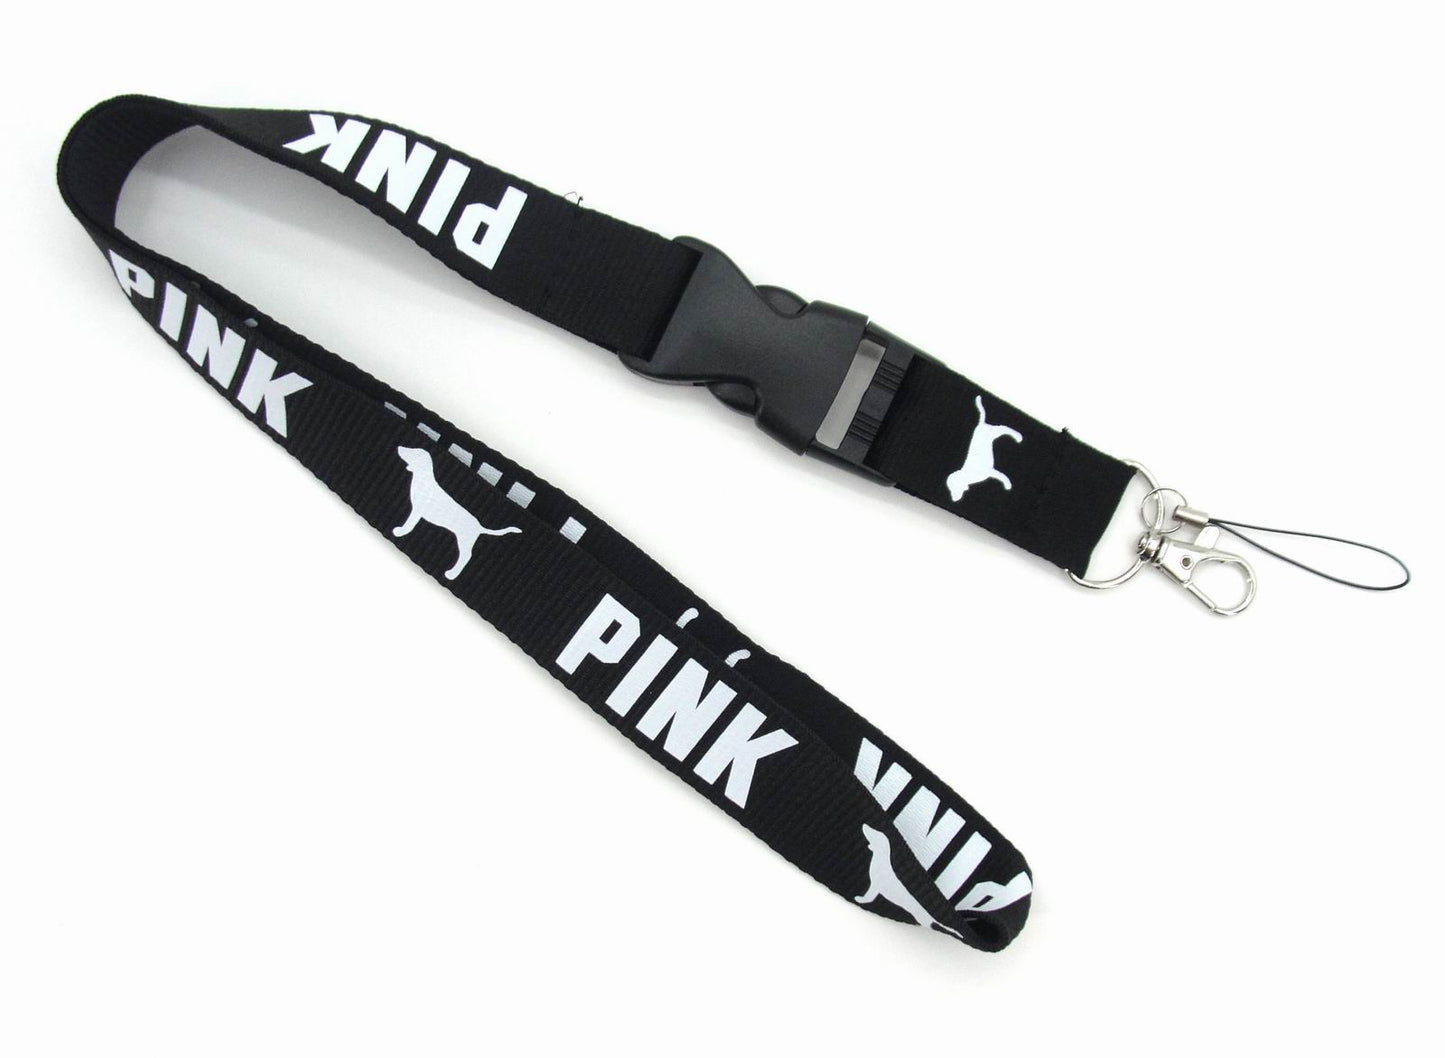 25MM Wide Best Factory directly sale ! Hot Fashion Clothing Lanyard Detachable Under Keychain for Cell Phone